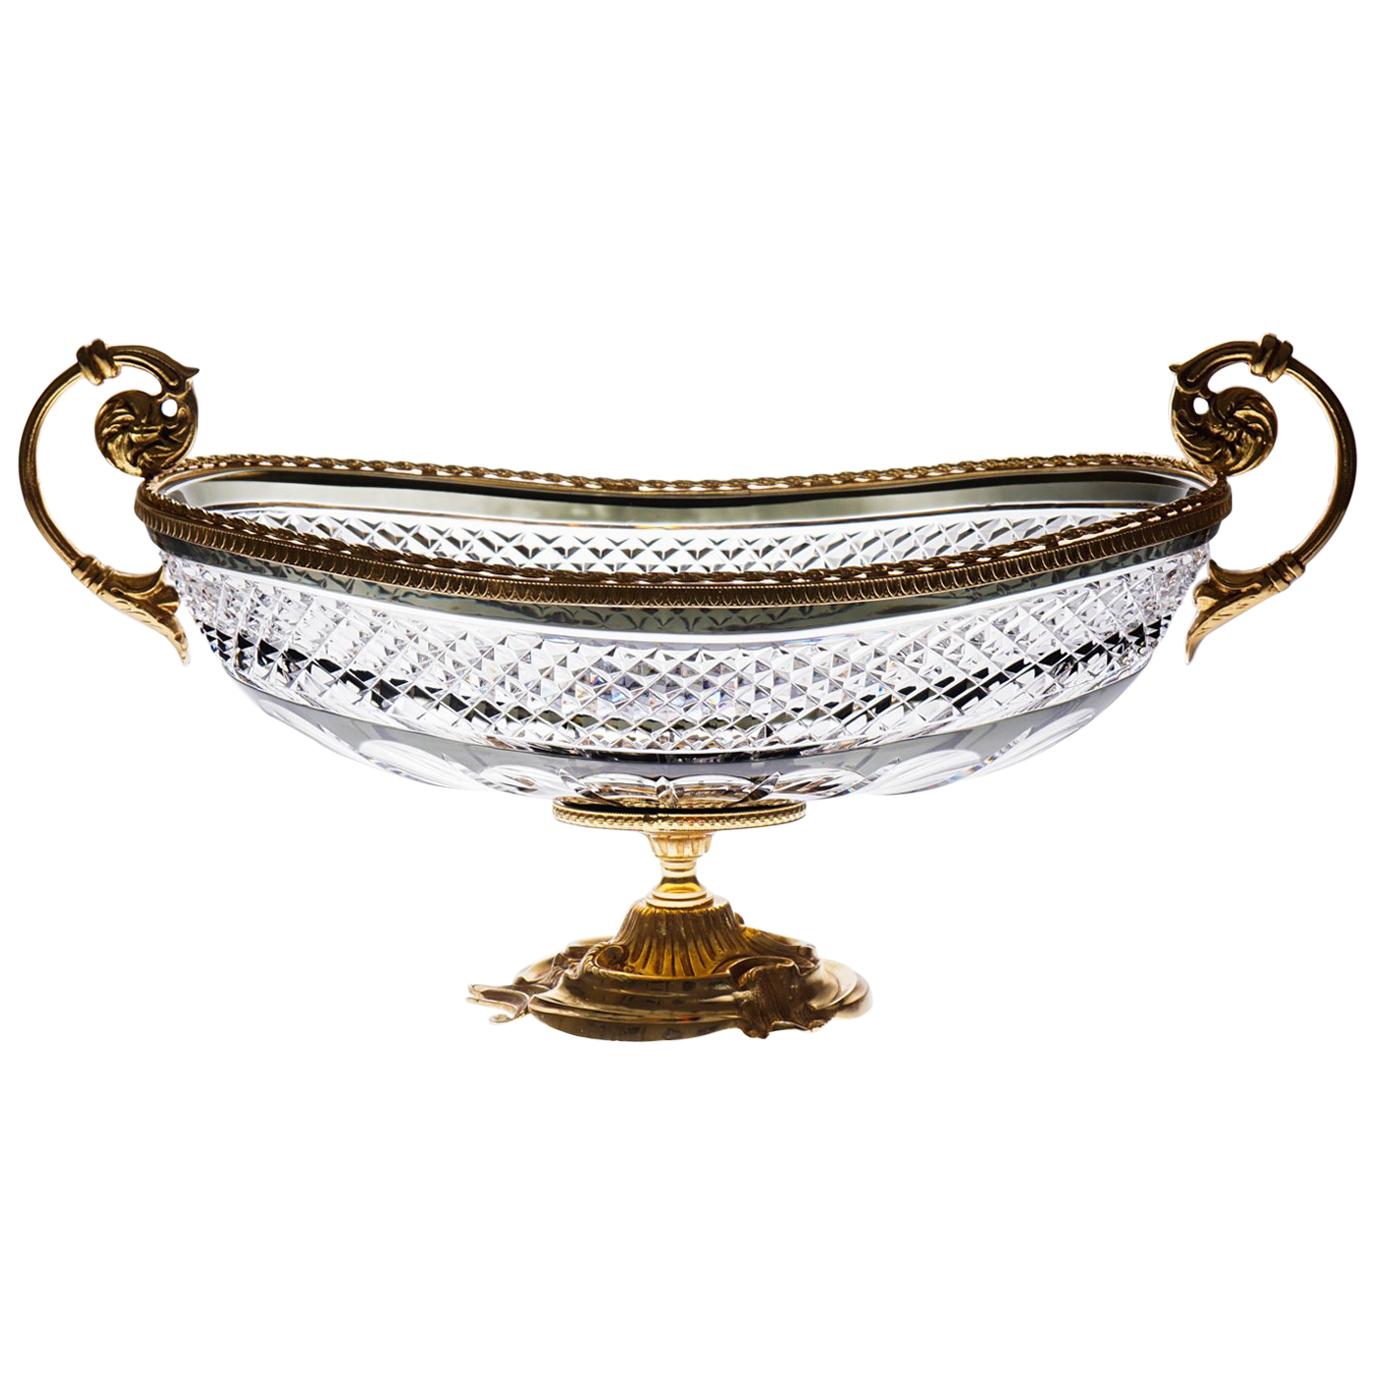 Clear Cristal Jardinière with Bronze Covered 22-Carat Gold, Oriental Style For Sale